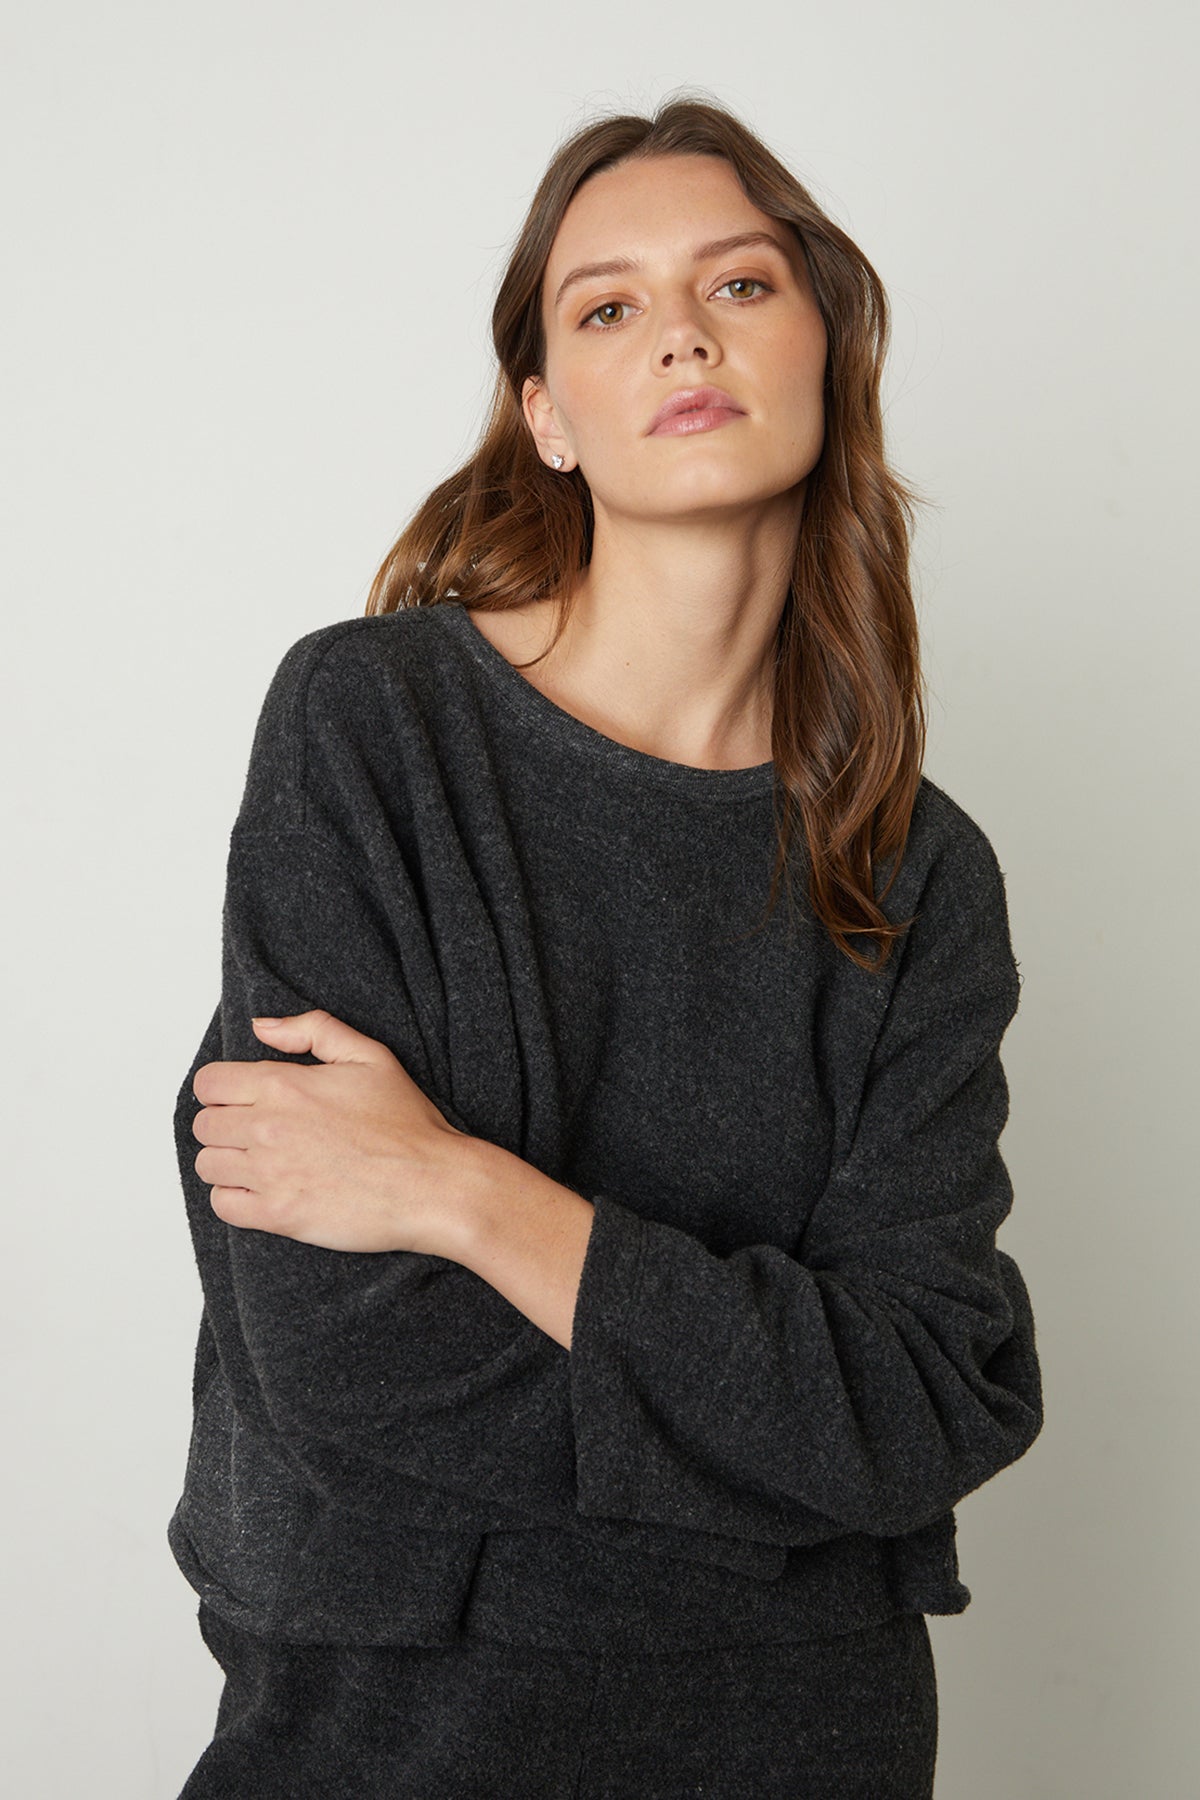   The model is wearing a black Arissa Cropped Sweatshirt and jeans by Velvet by Graham & Spencer. 